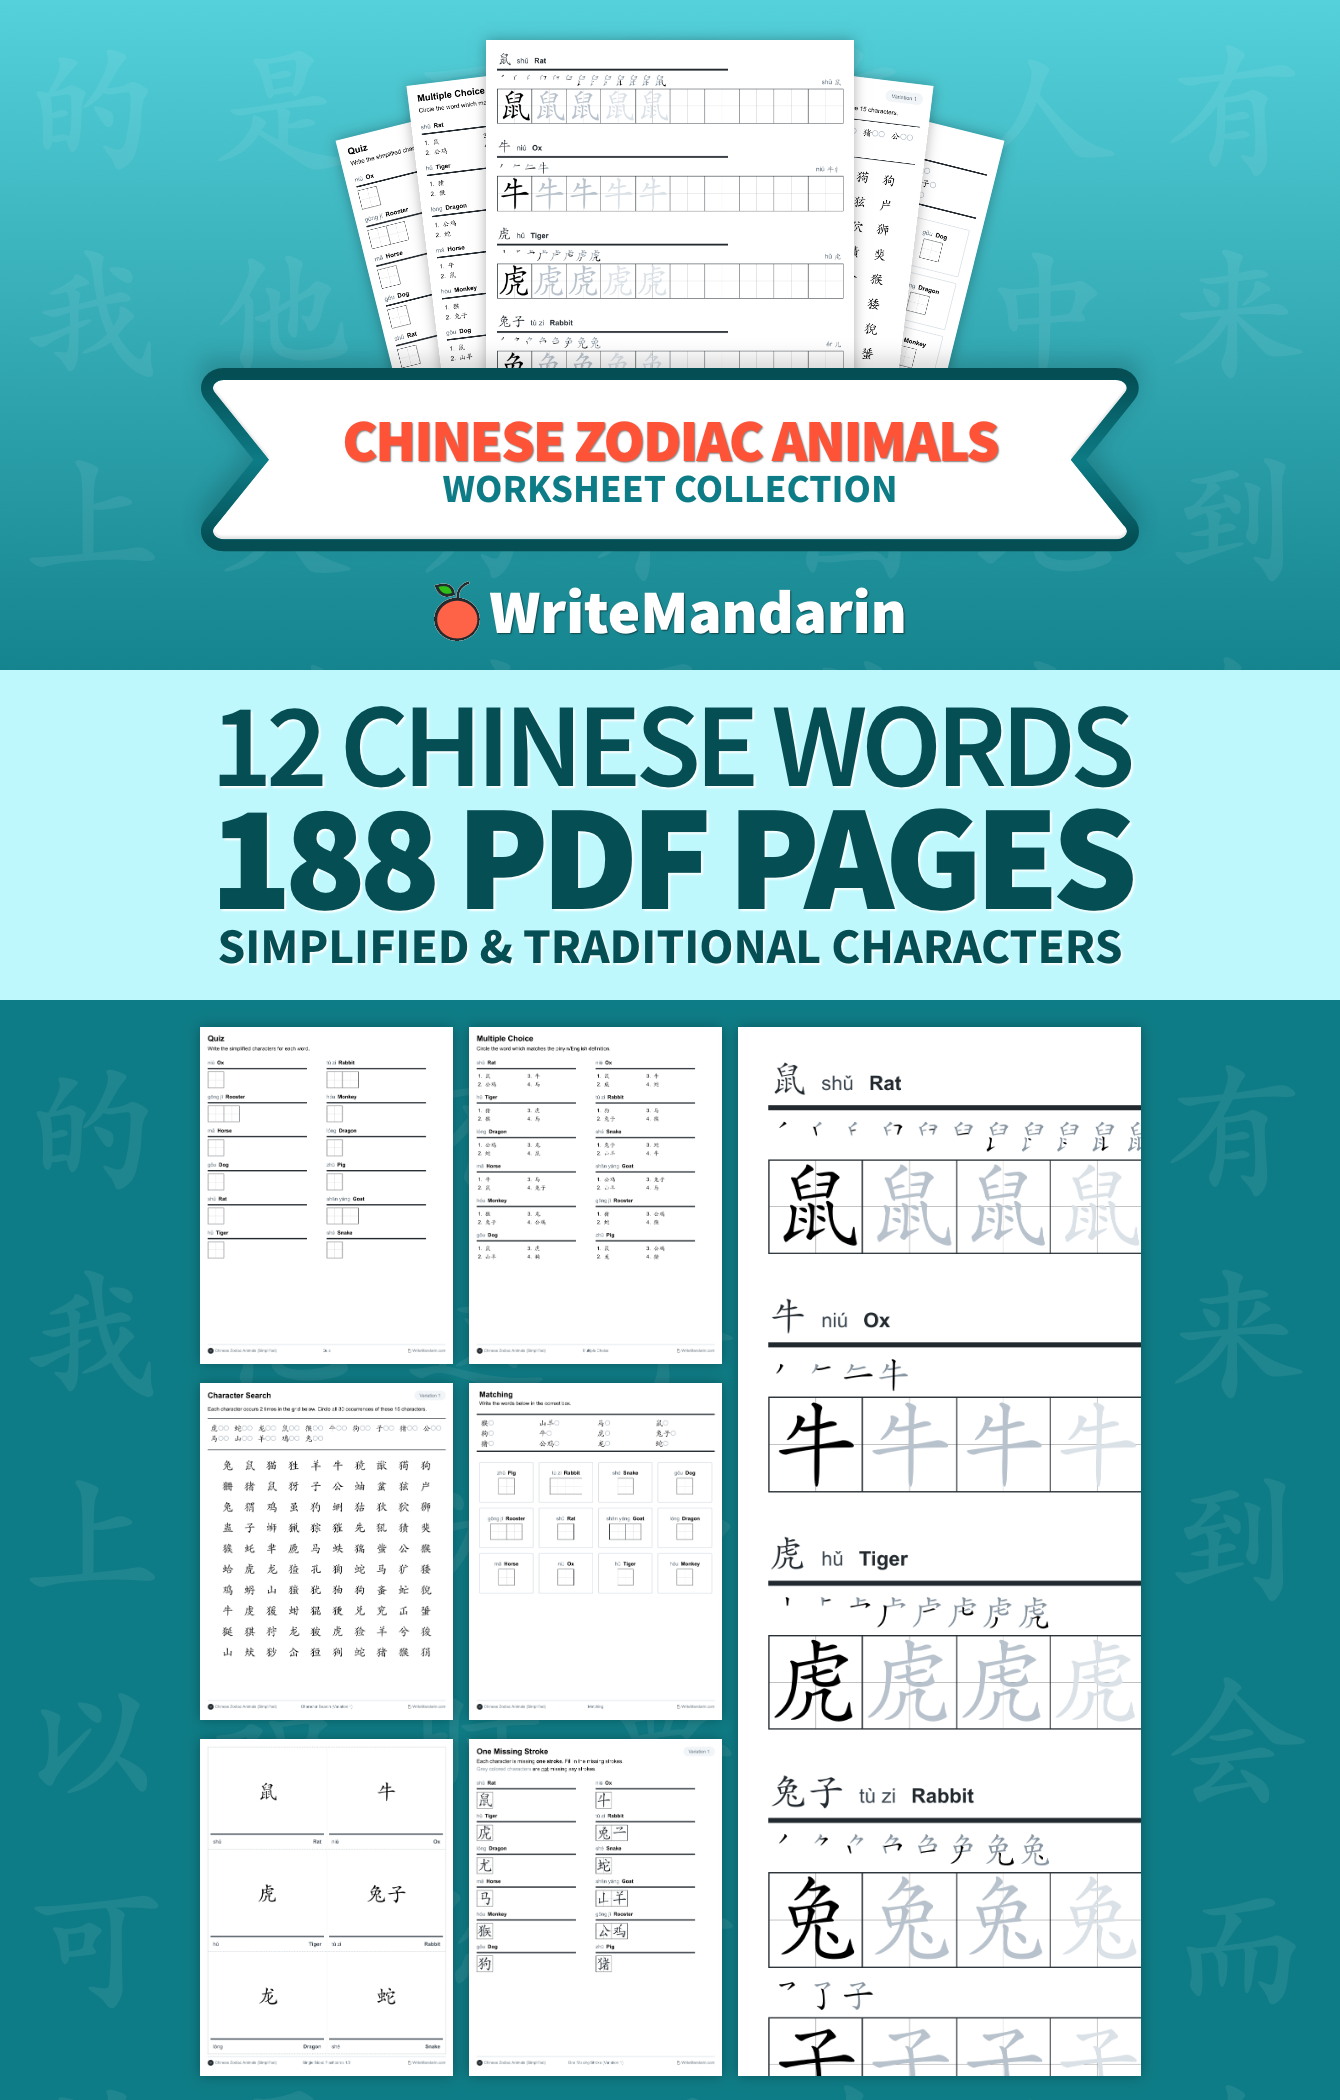 Preview image of Chinese Zodiac Animals worksheet collection